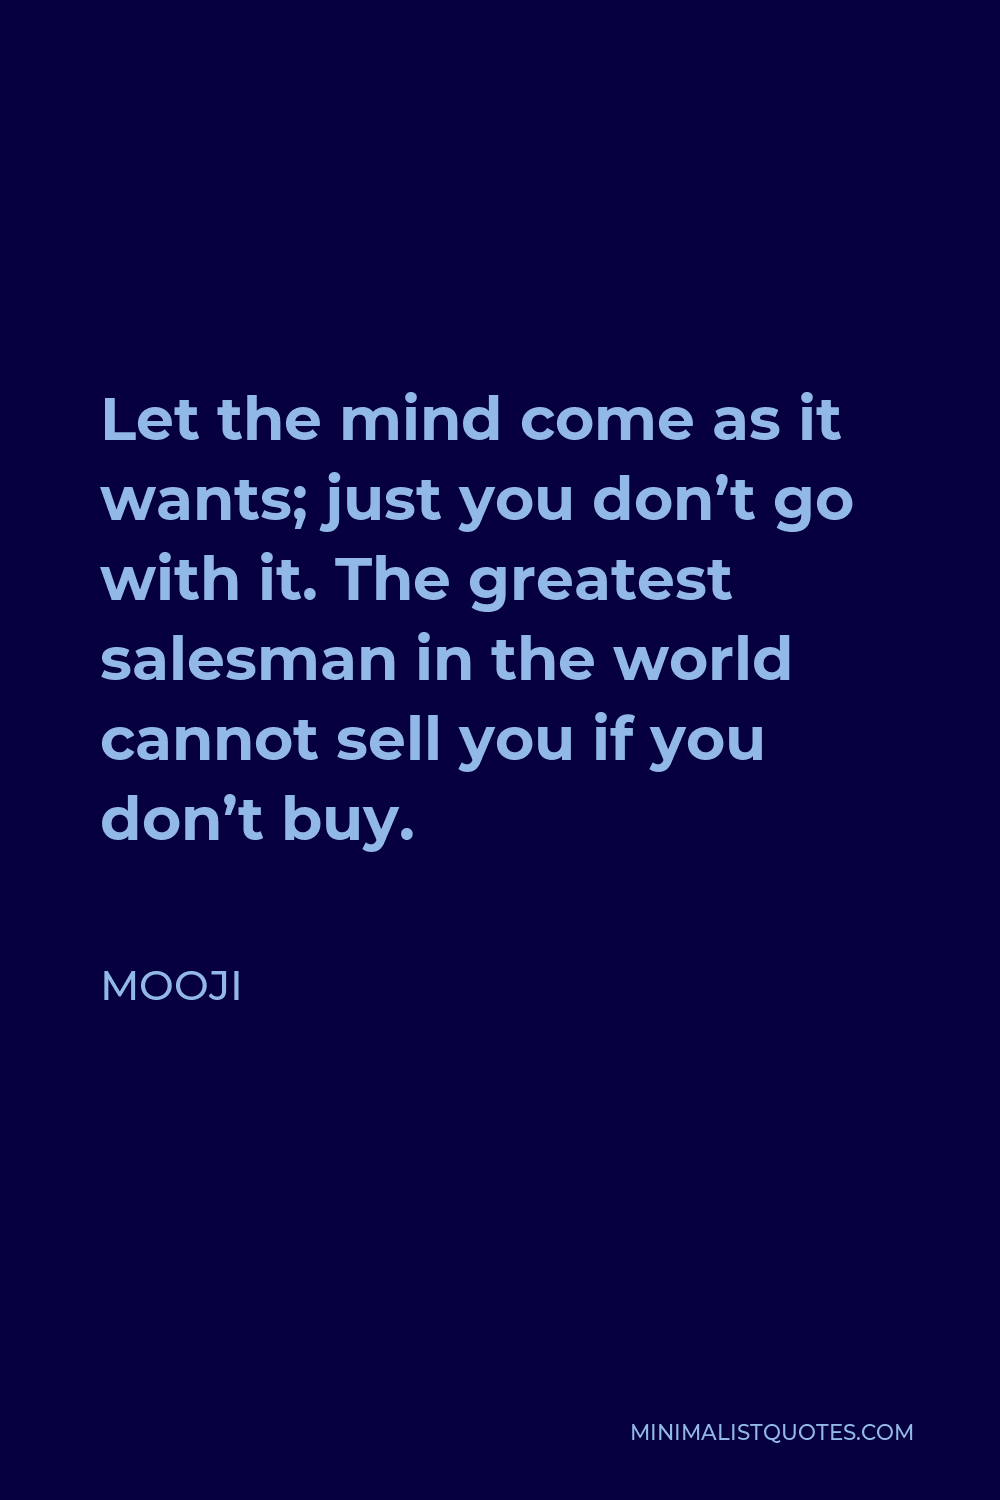 Mooji Quote - Let the mind come as it wants; just you don’t go with it. The greatest salesman in the world cannot sell you if you don’t buy.